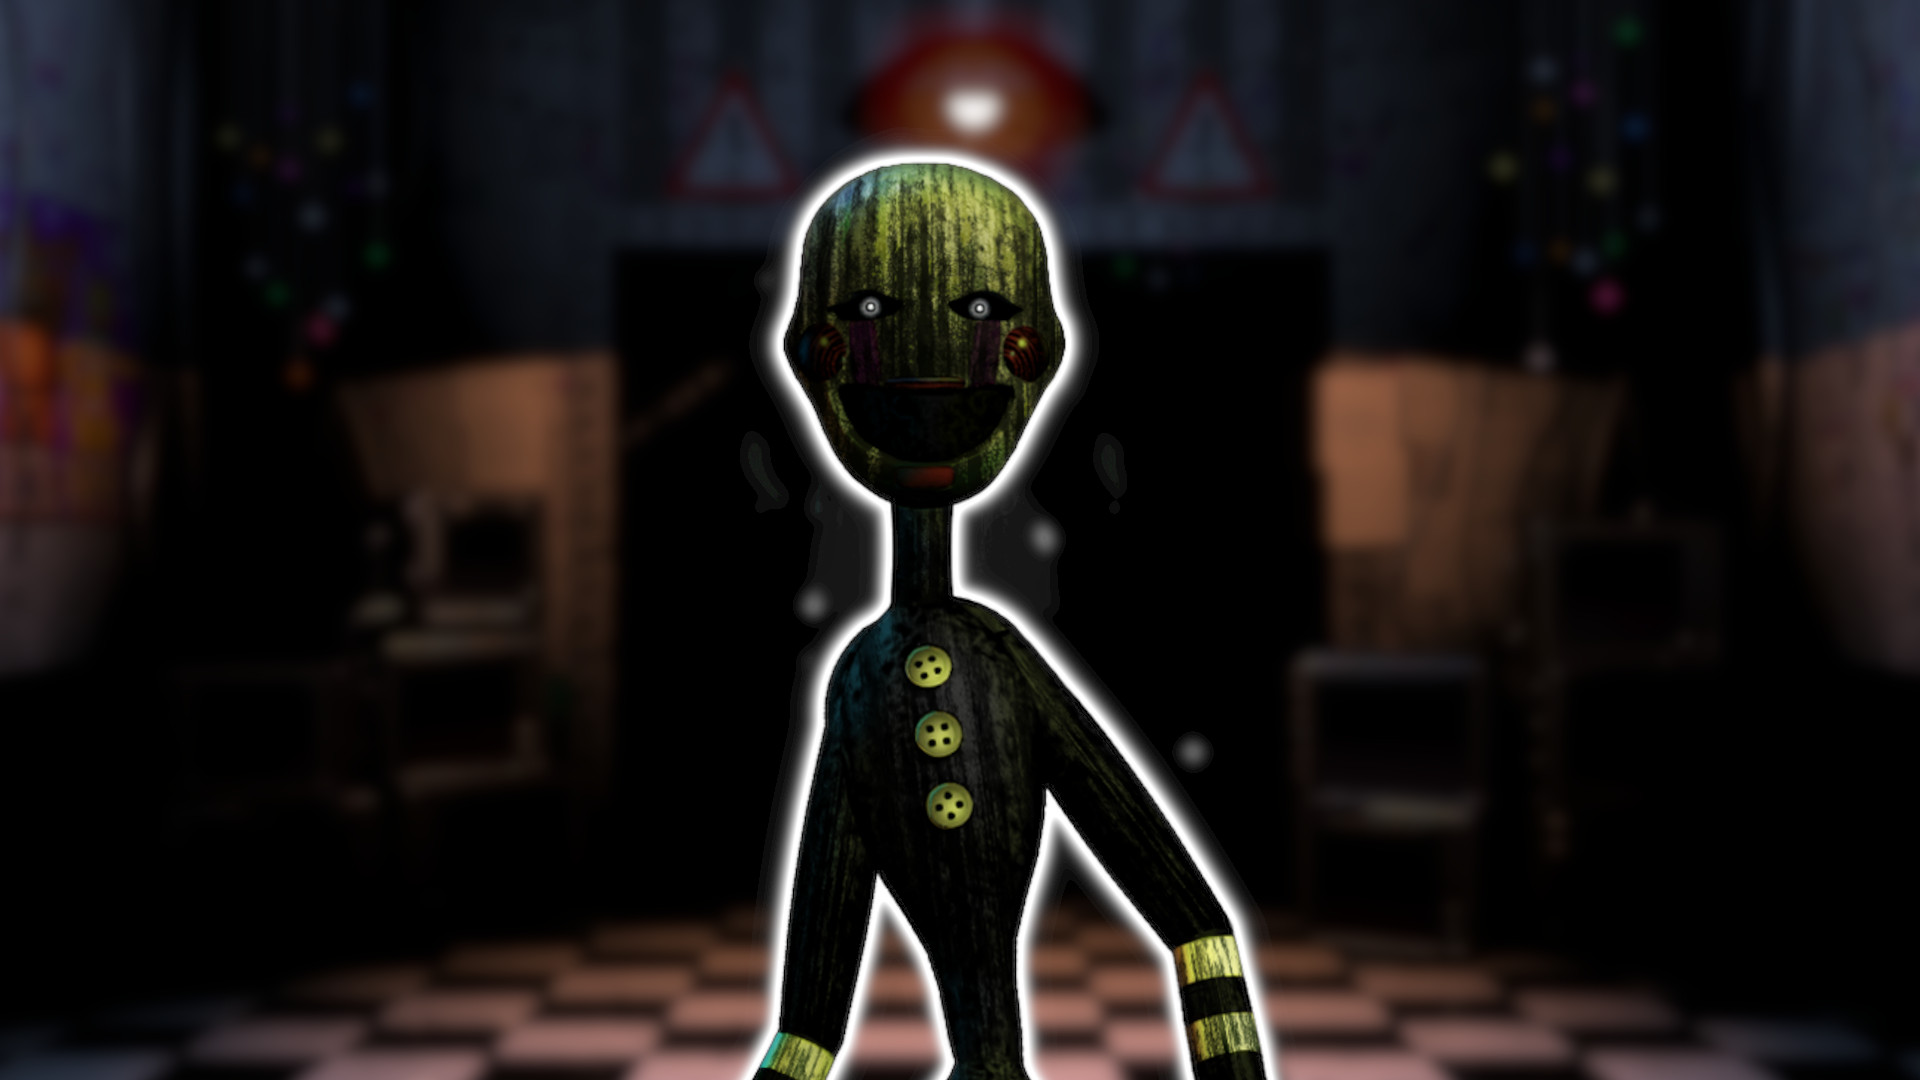 Phantom PuppetIs the character that ruins all of Matpats lore